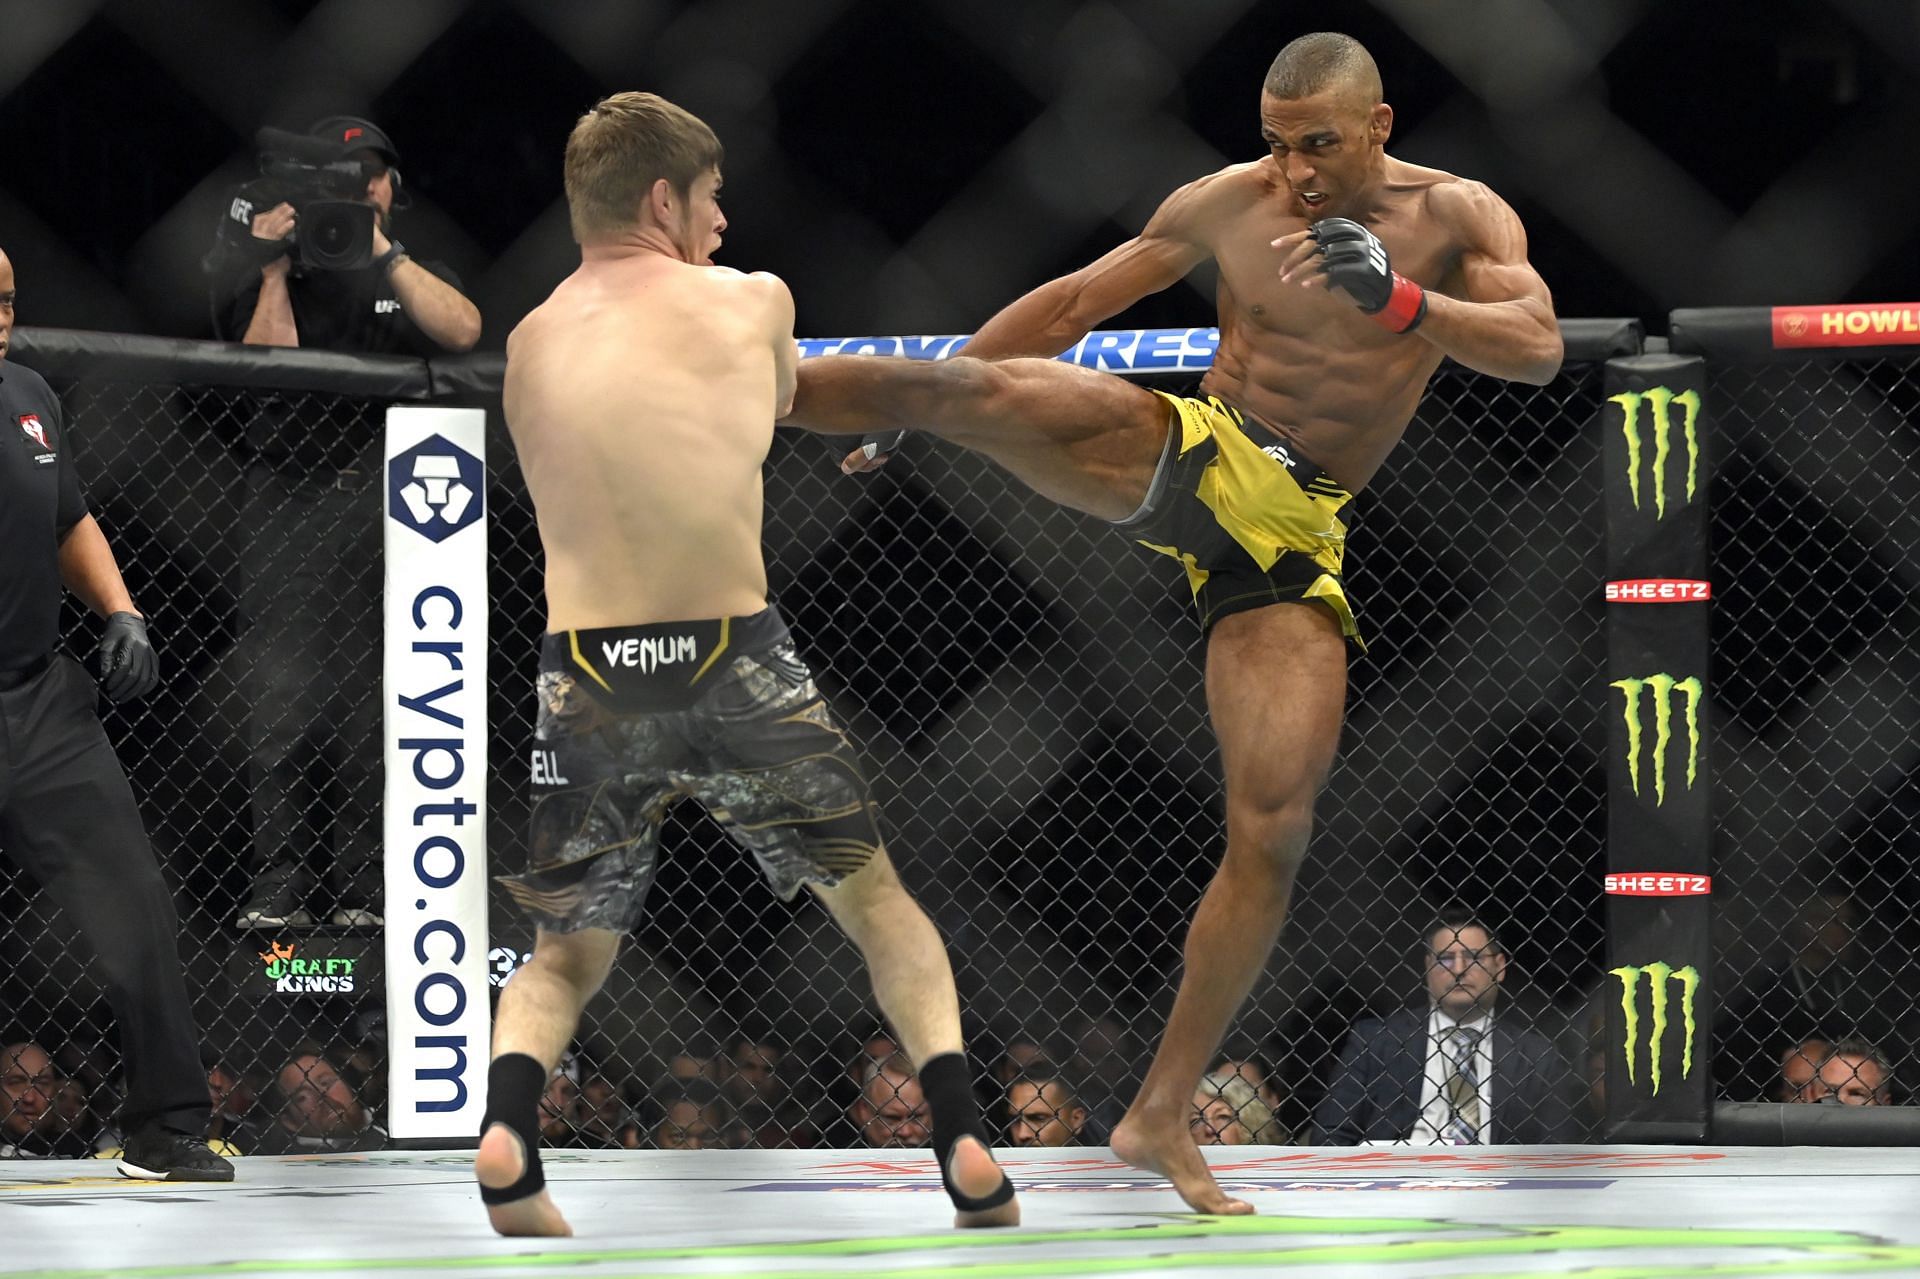 Edson Barboza holds a record of 22-11